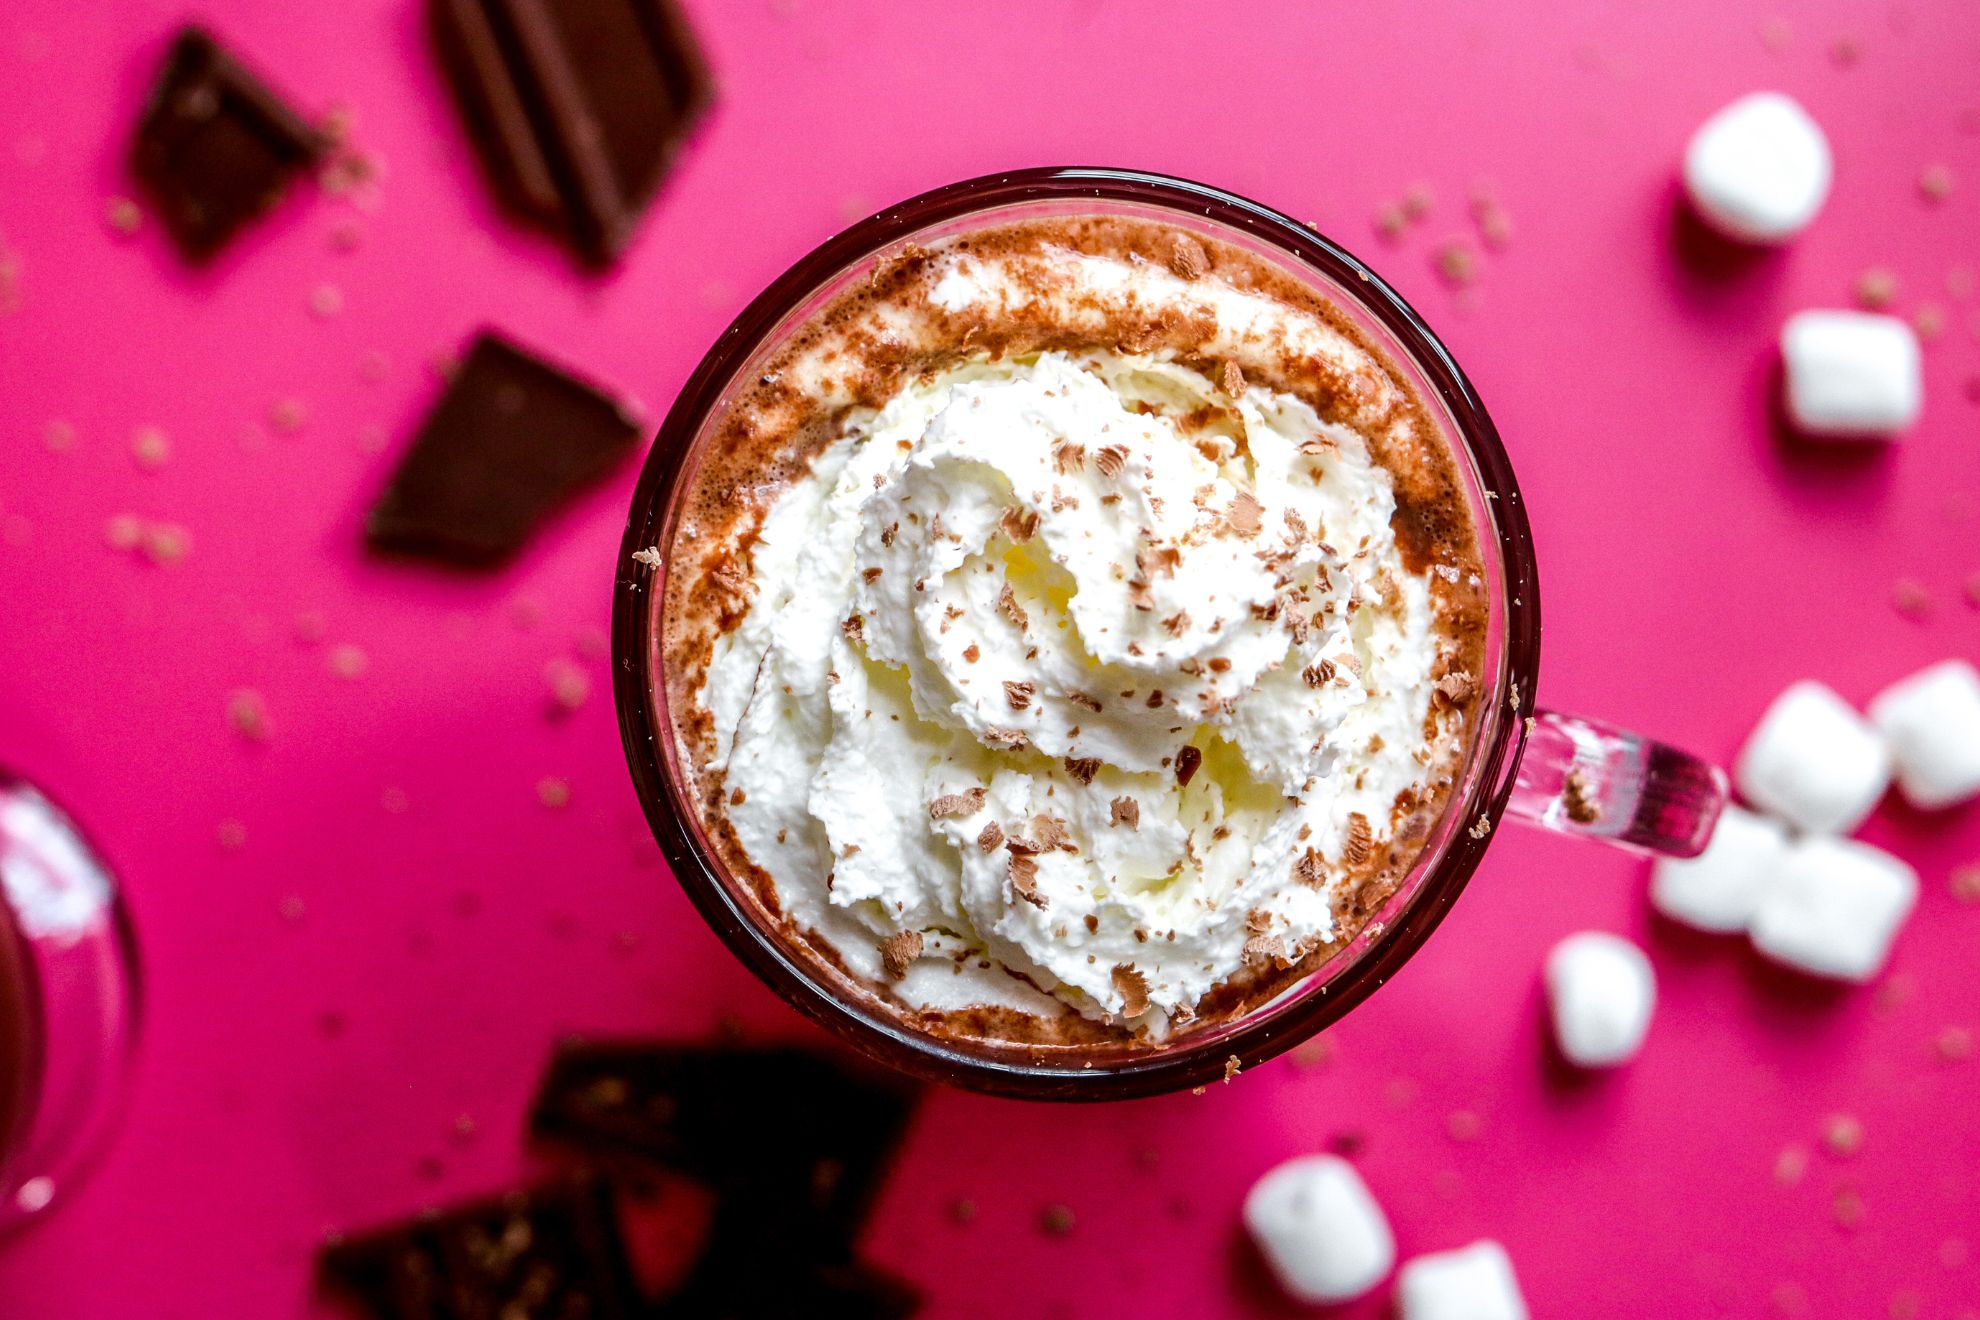 This is an overhead image of hot chocolate with whipped cream in a glass mug. The mug sits on a hot pink surface with pieces of a broken chocolate bar and mini marshmallows on the pink surface surrounding the mug.